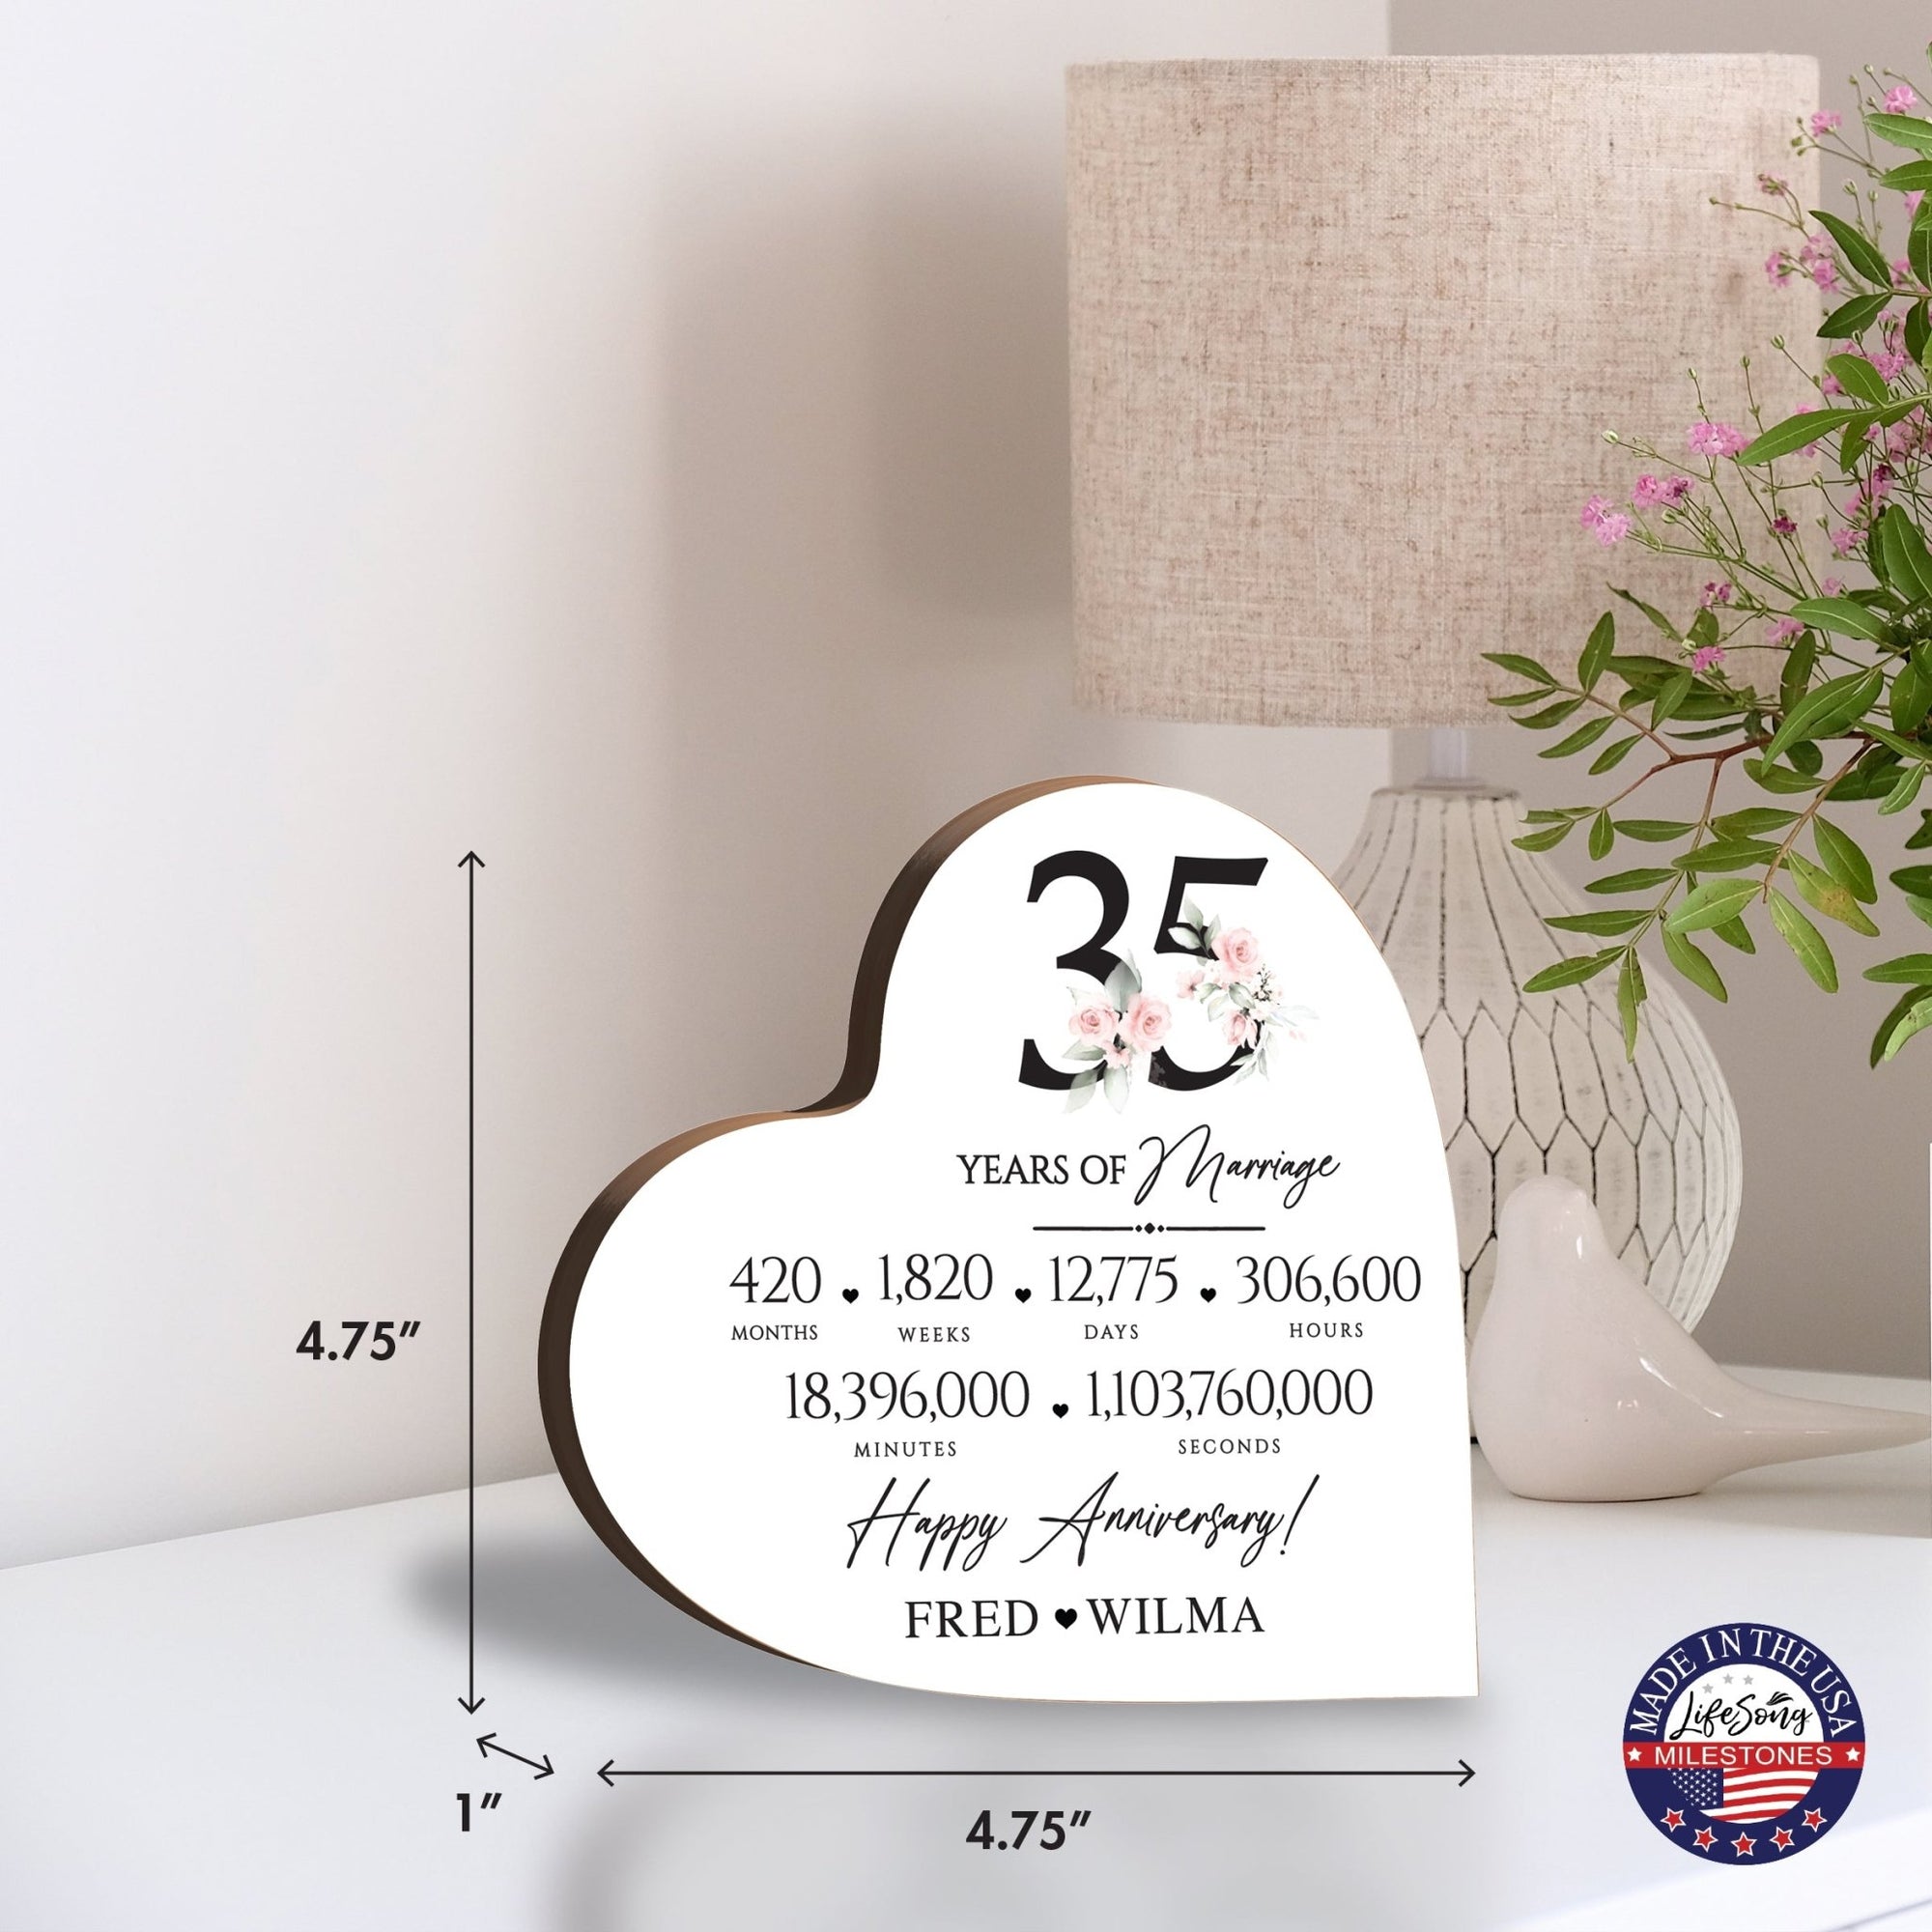 Personalized Wooden Anniversary Heart Shaped Signs - 35th Anniversary - LifeSong Milestones